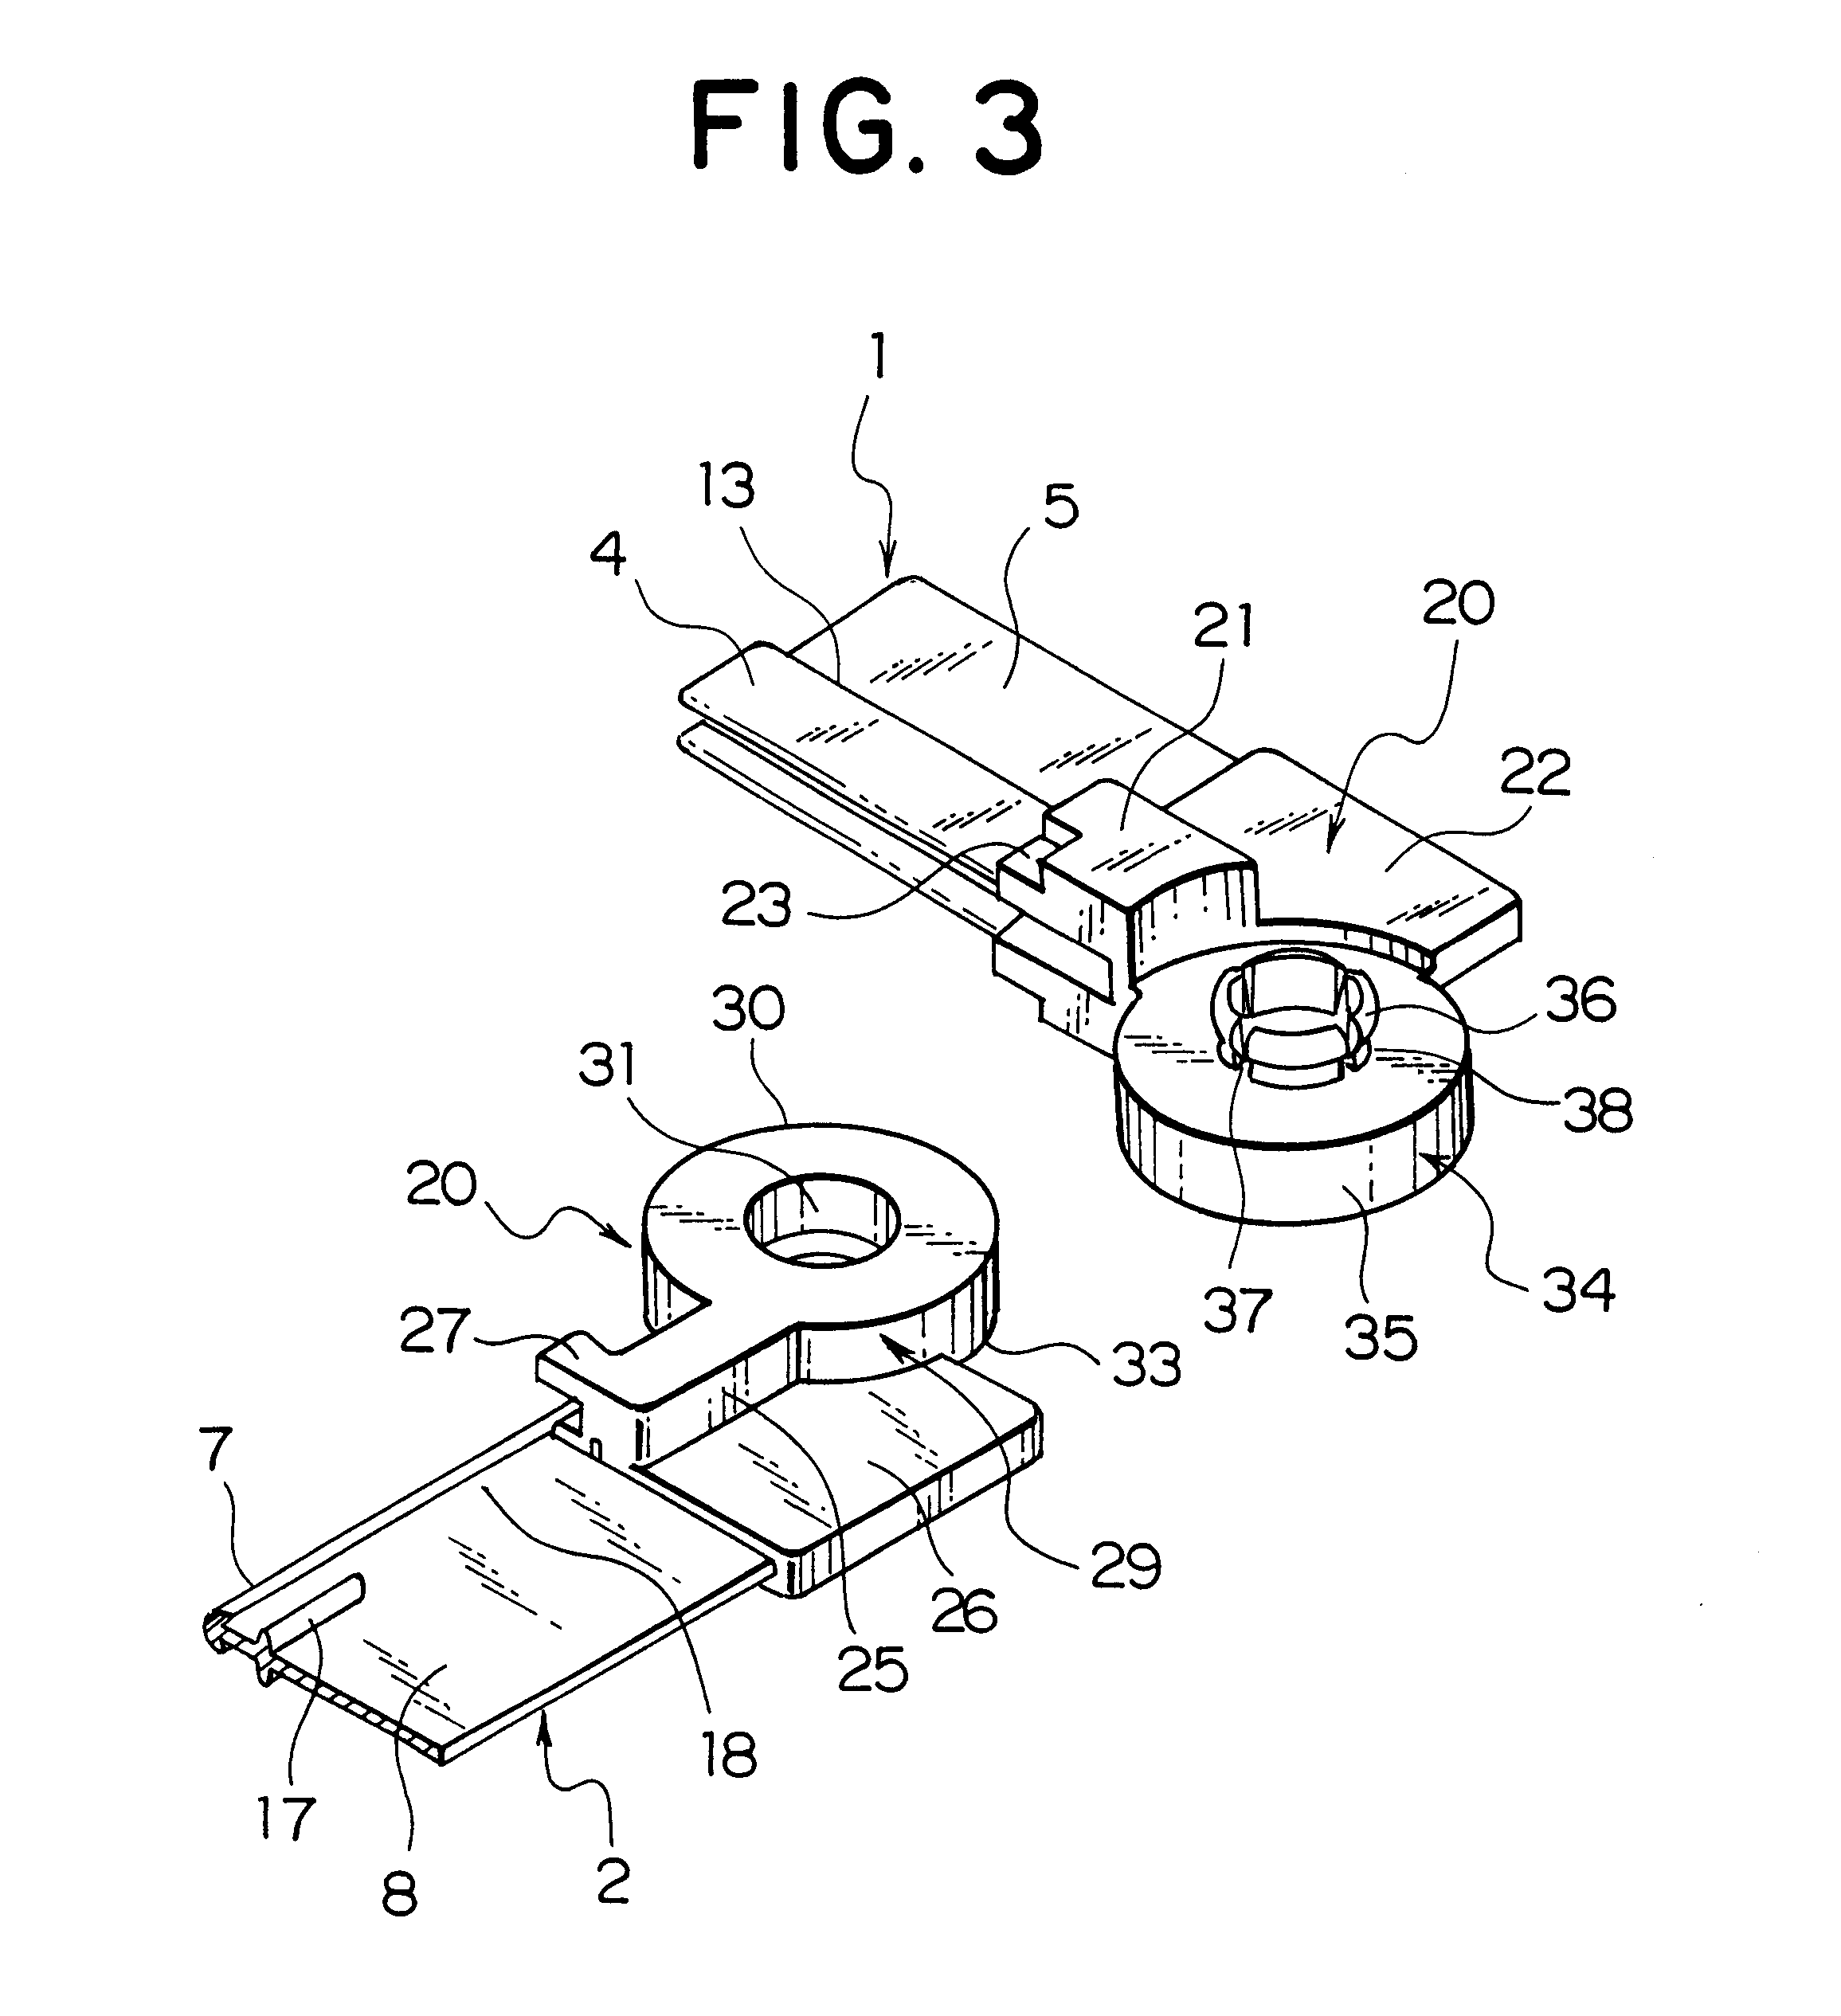 Meshing slide fastener with an engaging device